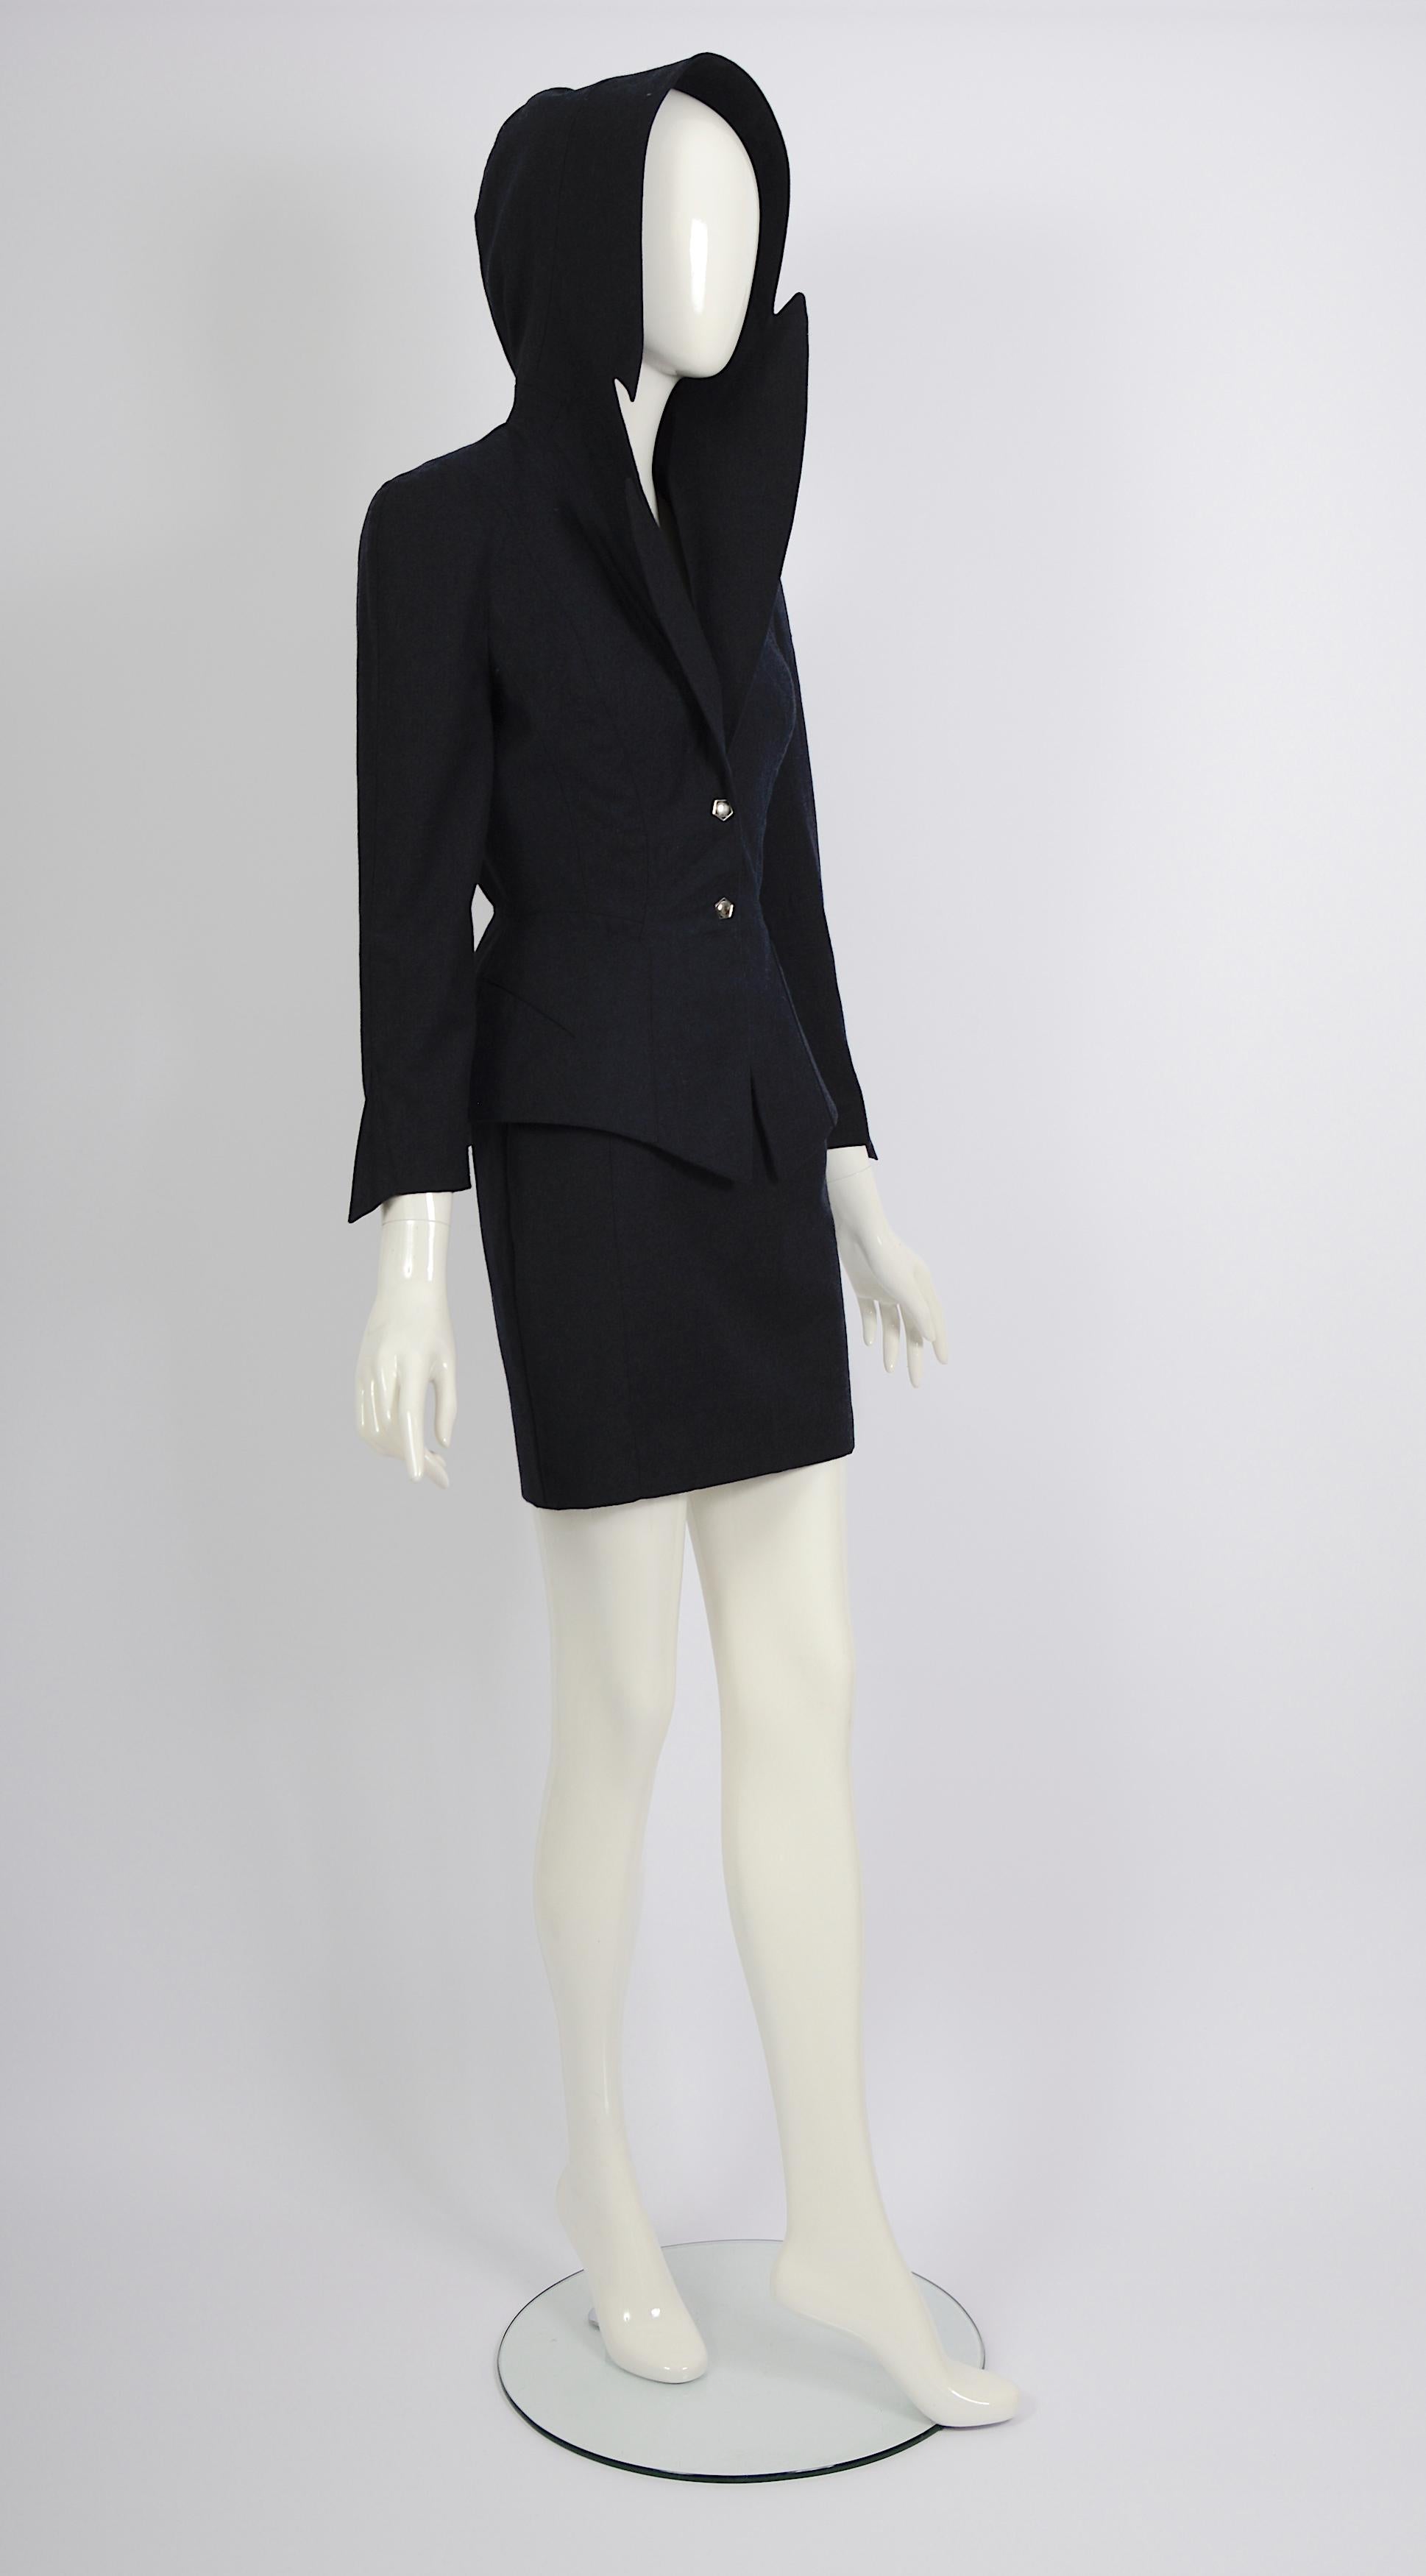 Thierry Mugler FW 1991 shiva collection blue wool hooded jacket & skirt set  For Sale 9